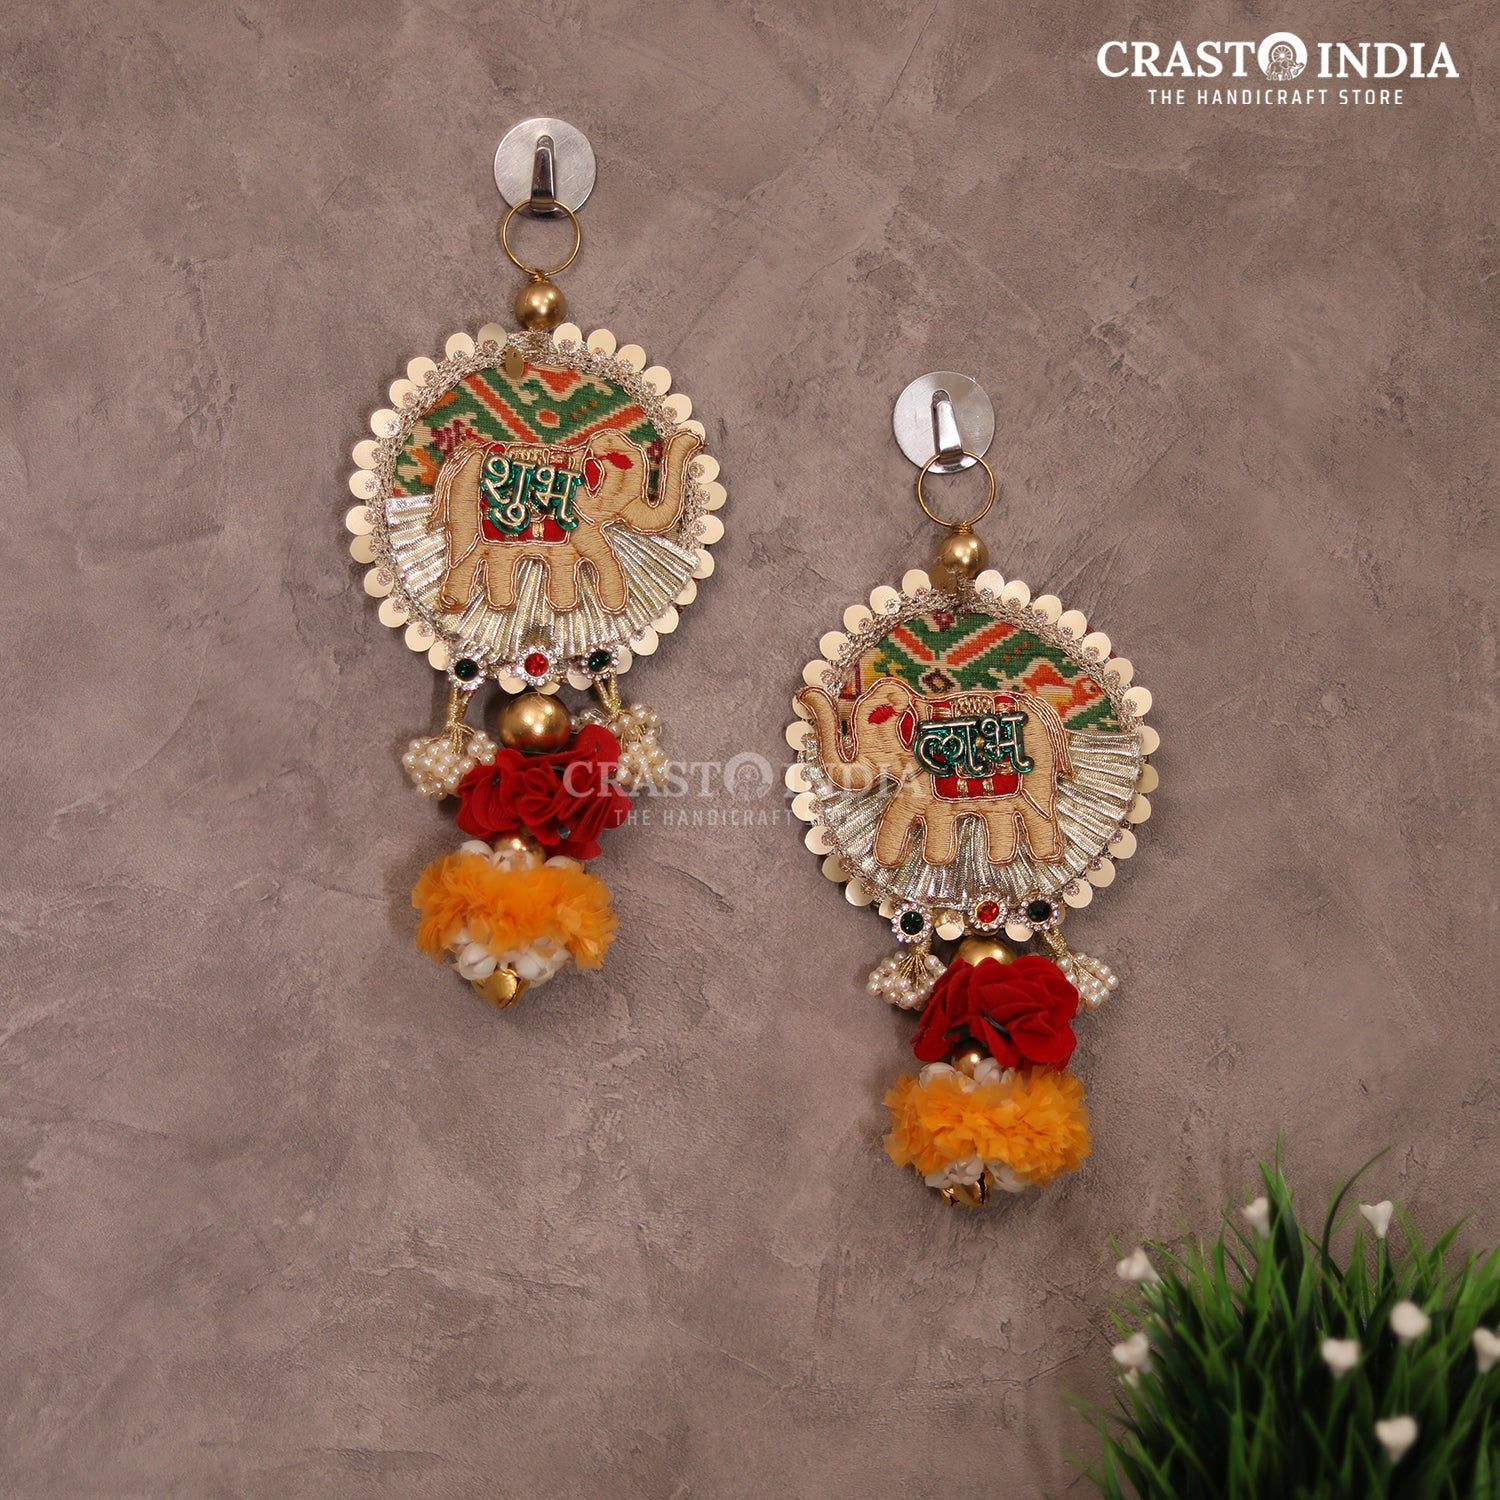 CRASTO INDIA HANDCRAFTED FESTIVE EMBROIDERED ELEPHANT PATCHWORK SHUBH LABH WITH 